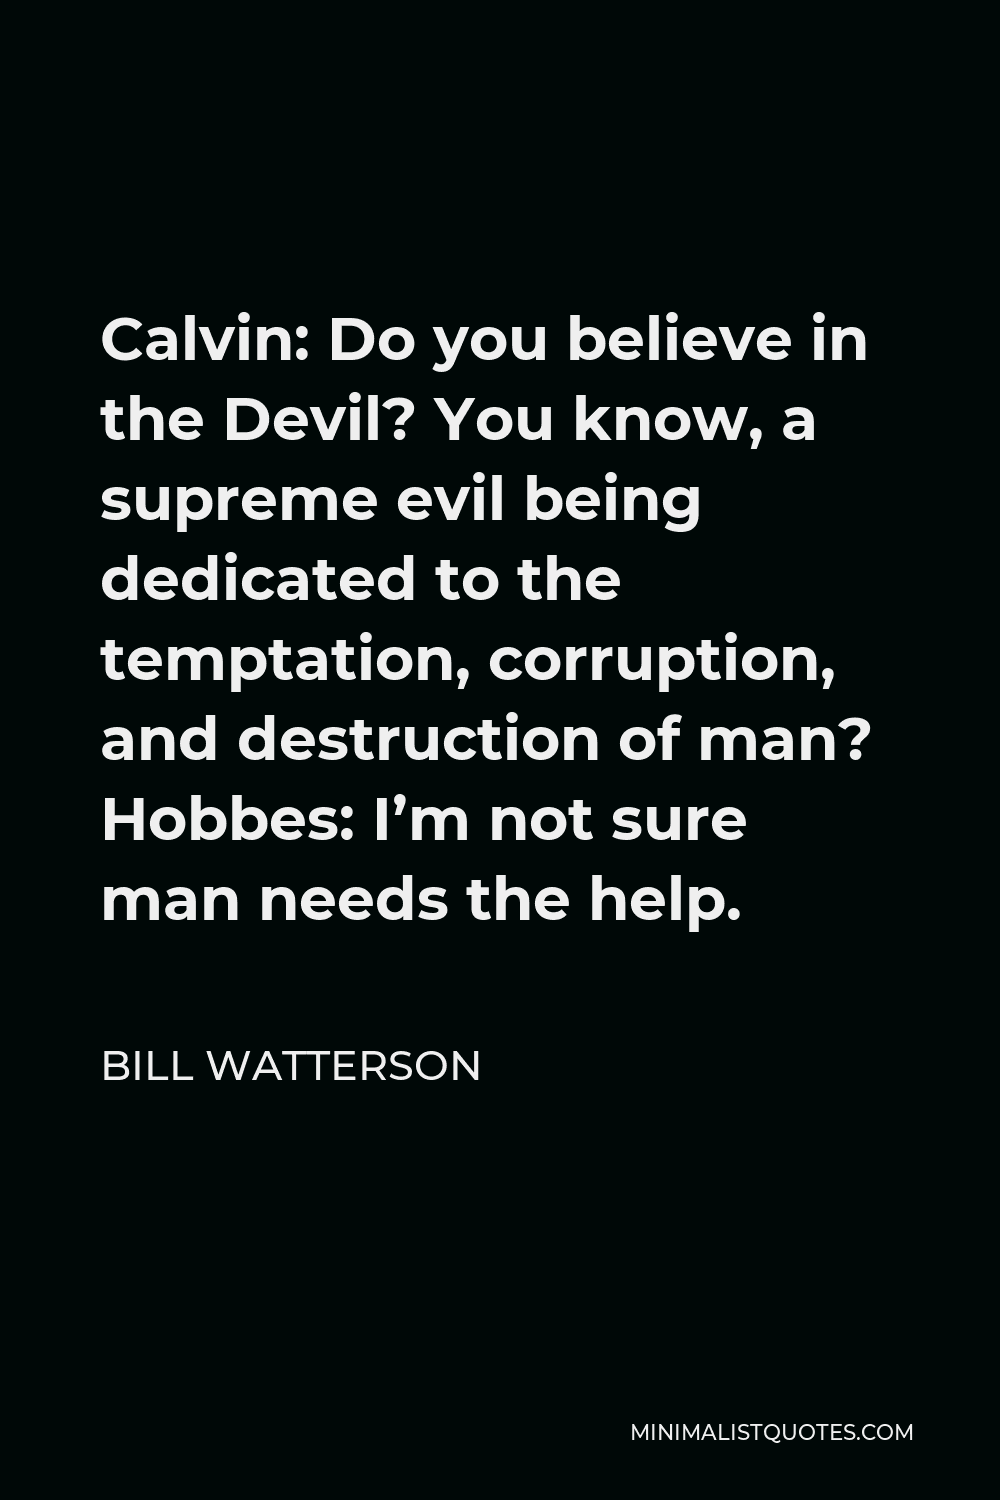 Bill Watterson Quote - Calvin: Do you believe in the Devil? You know, a supreme evil being dedicated to the temptation, corruption, and destruction of man? Hobbes: I’m not sure man needs the help.